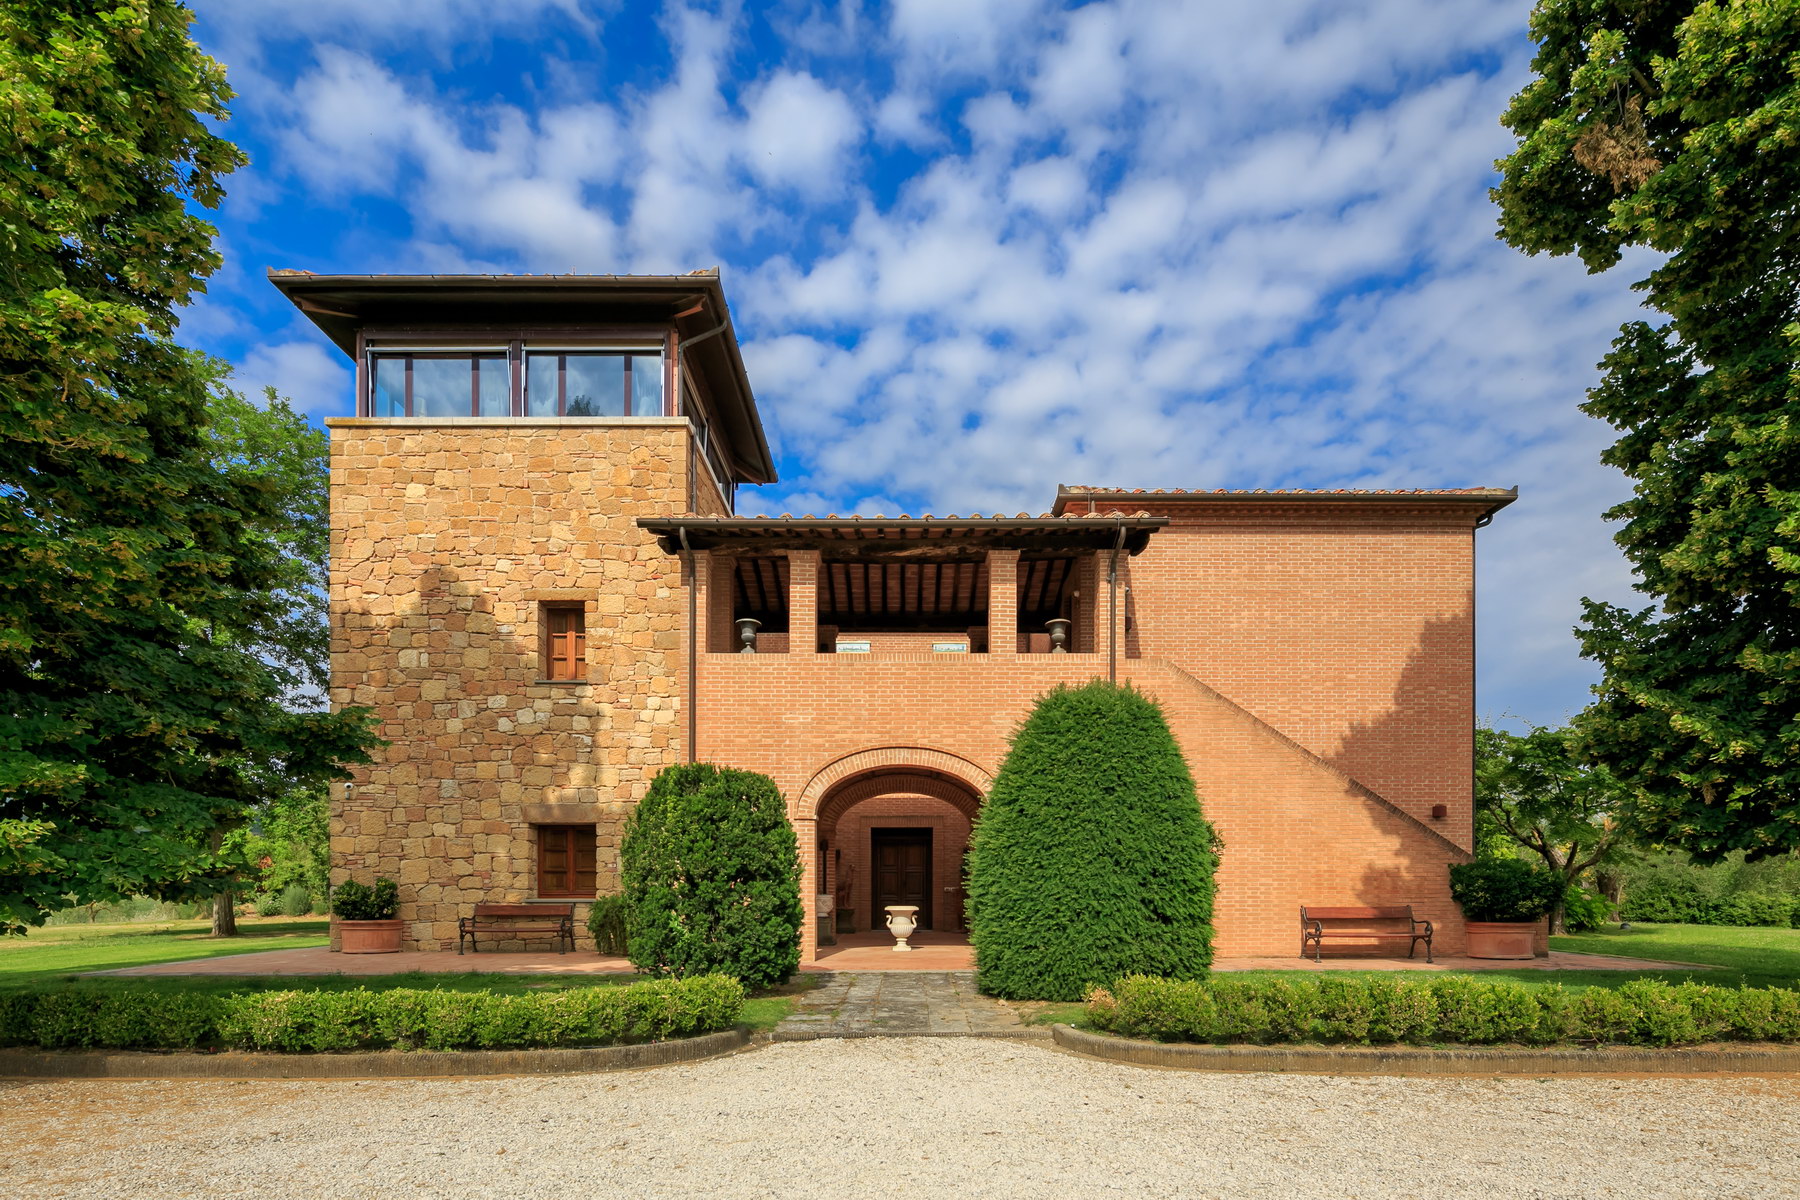 Marvelous villa immersed among the Montepulciano vineyards